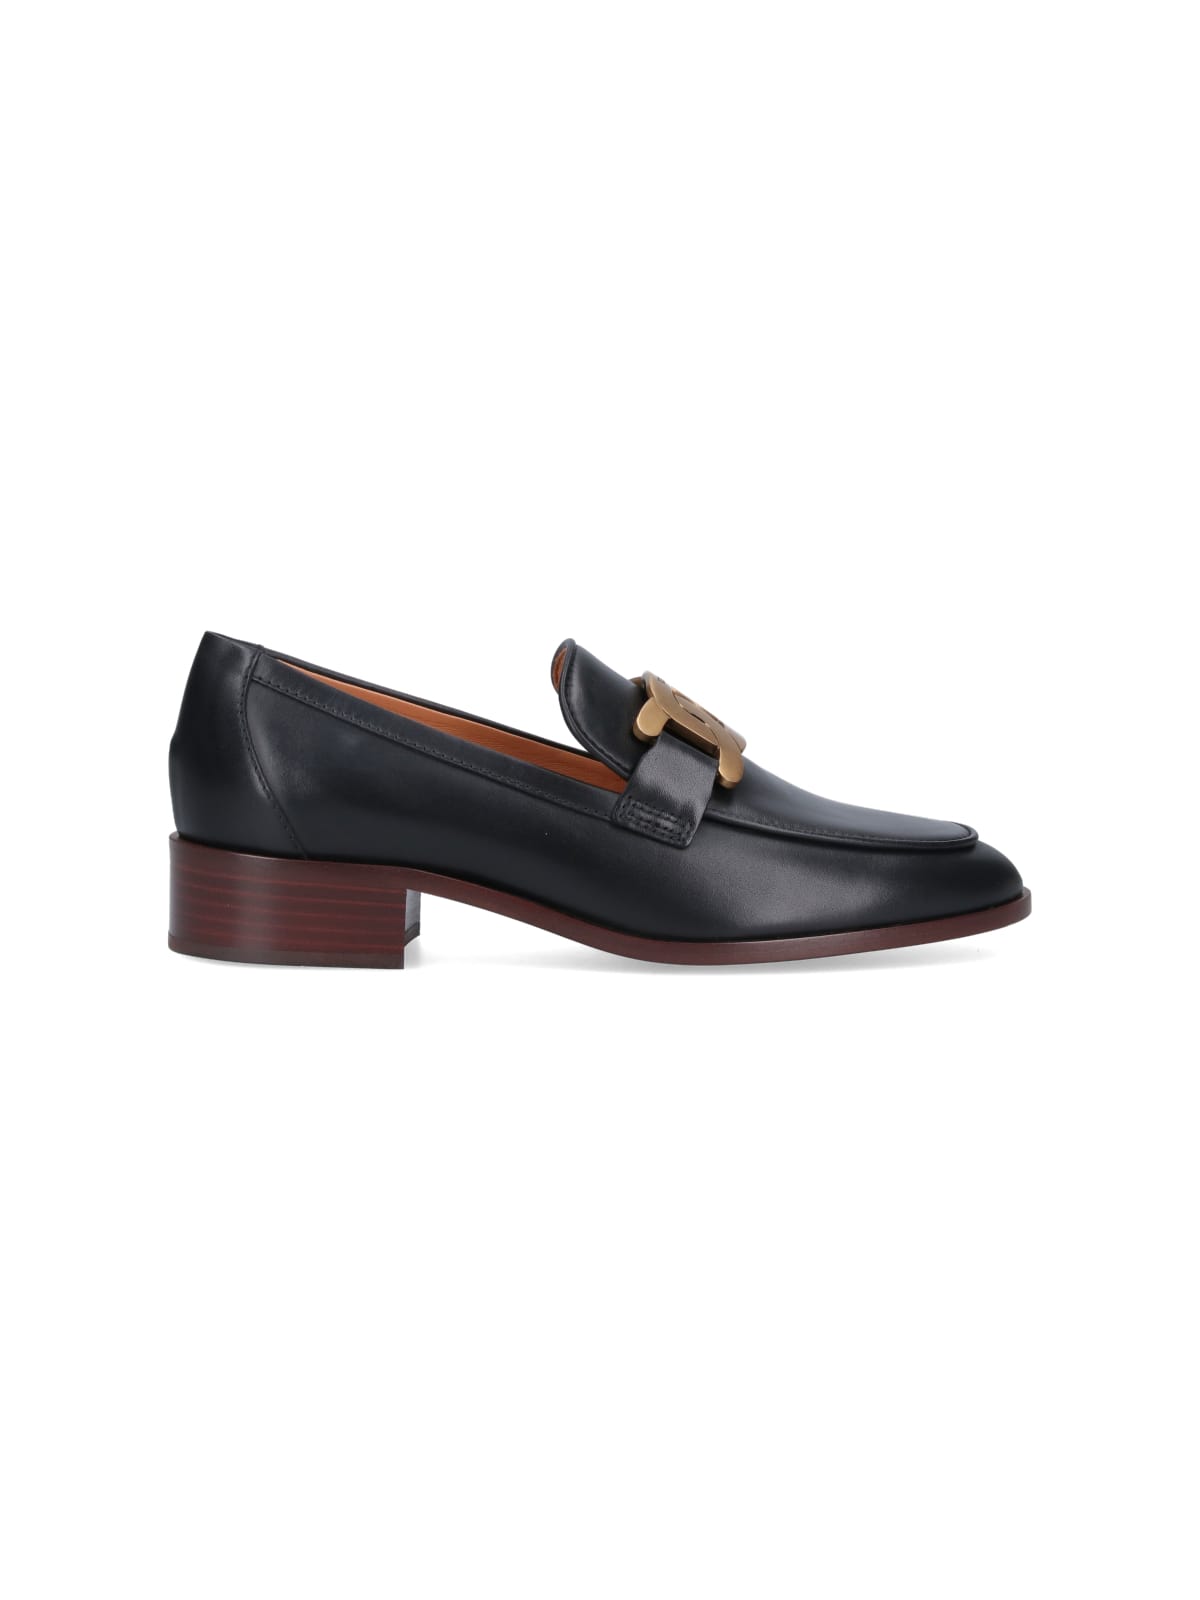 TOD'S FLAT SHOES